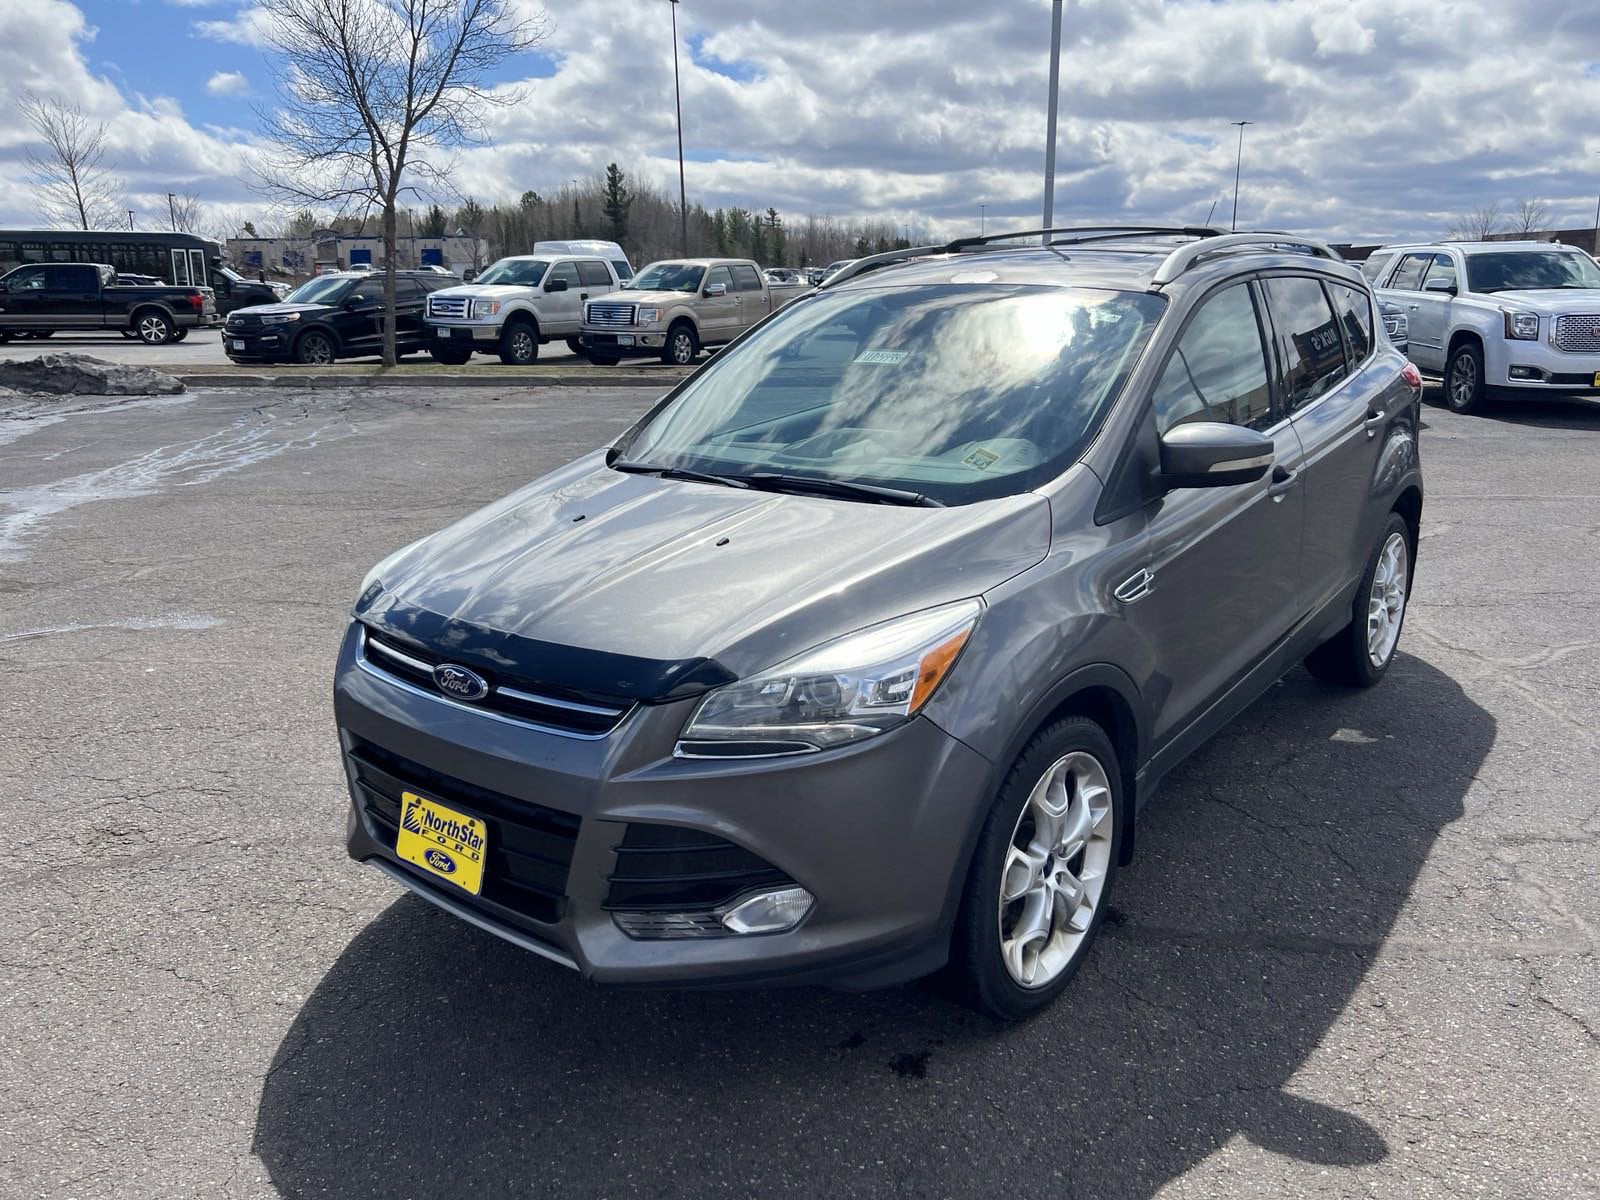 Used 2013 Ford Escape Titanium with VIN 1FMCU9J99DUD54354 for sale in Duluth, Minnesota